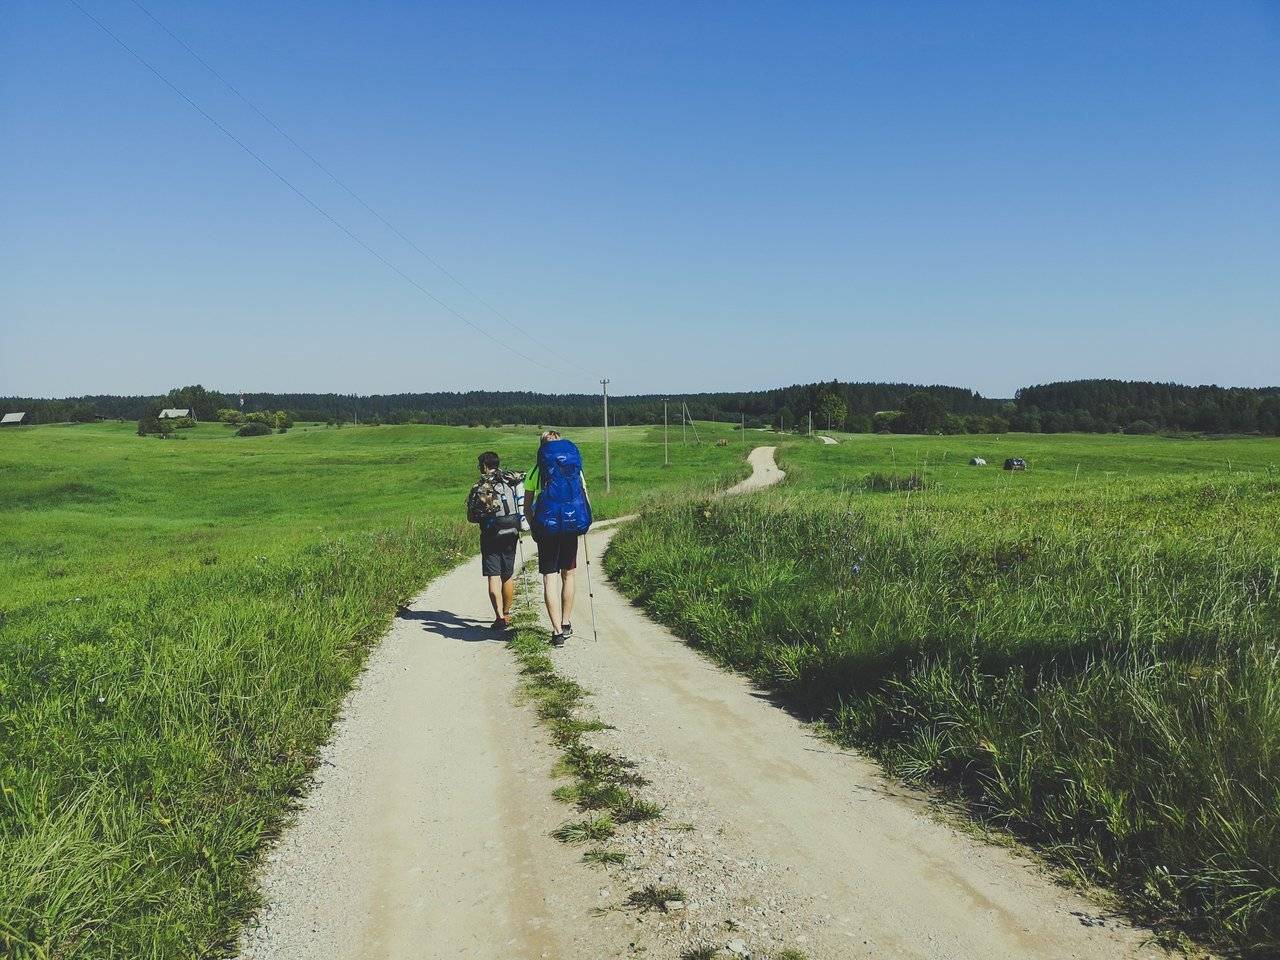   Walking through country side near Lakajai Lakes in Labanoras regional Park, Lithuania. Photo Alis Monte [CC BY-SA 4.0], via Connecting the Dots